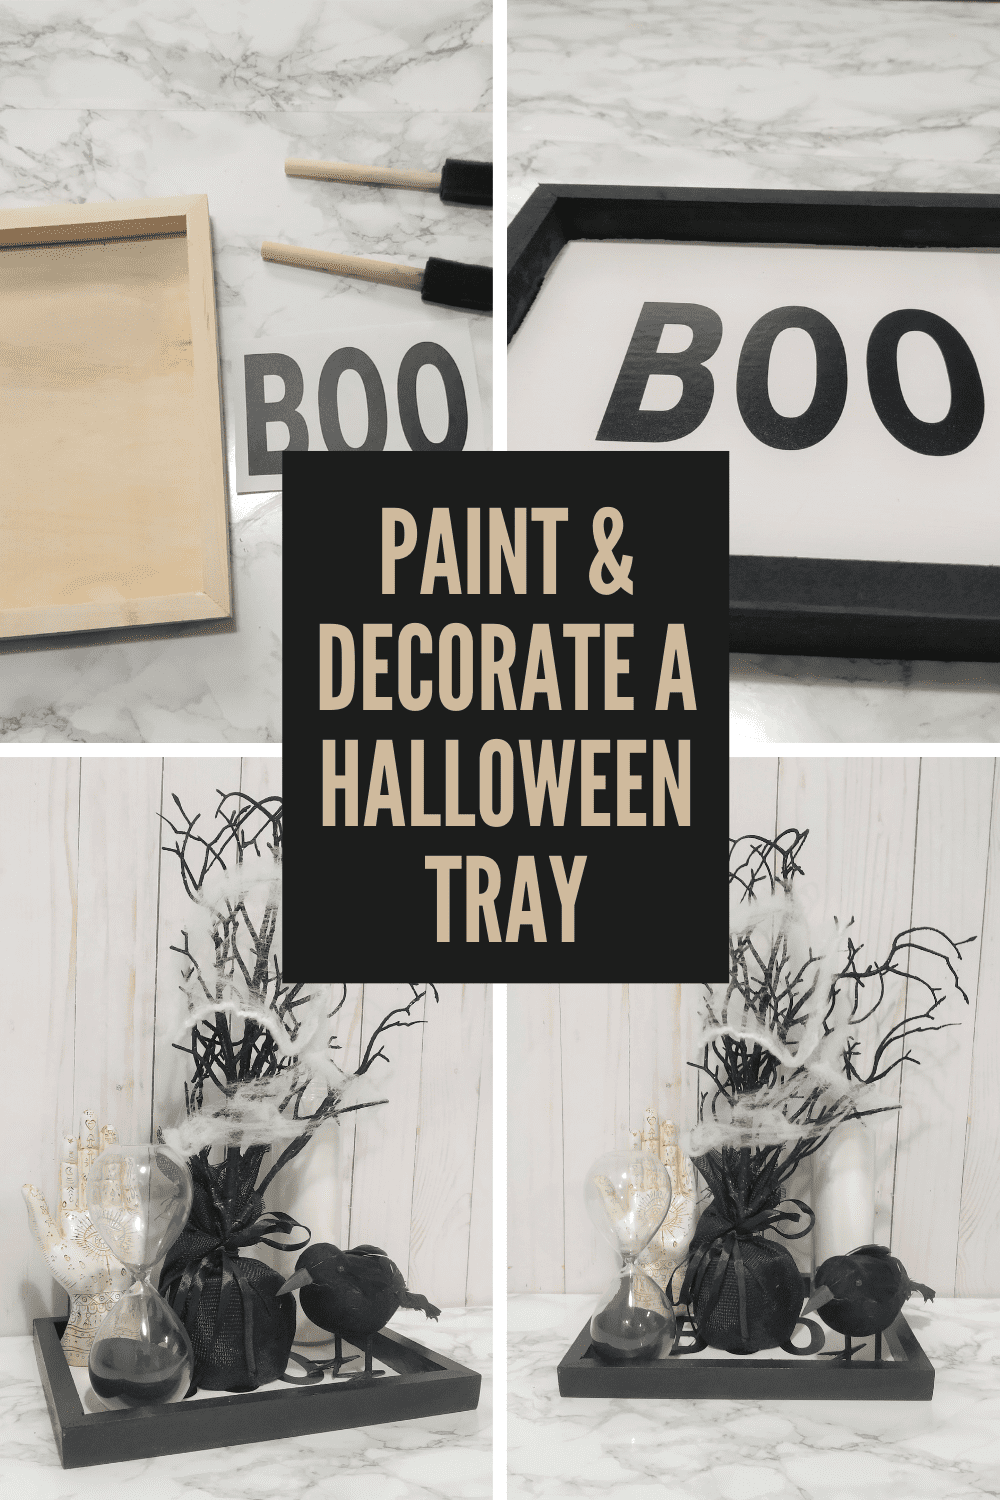 Collage of Halloween wood tray with decorations and text overlay.